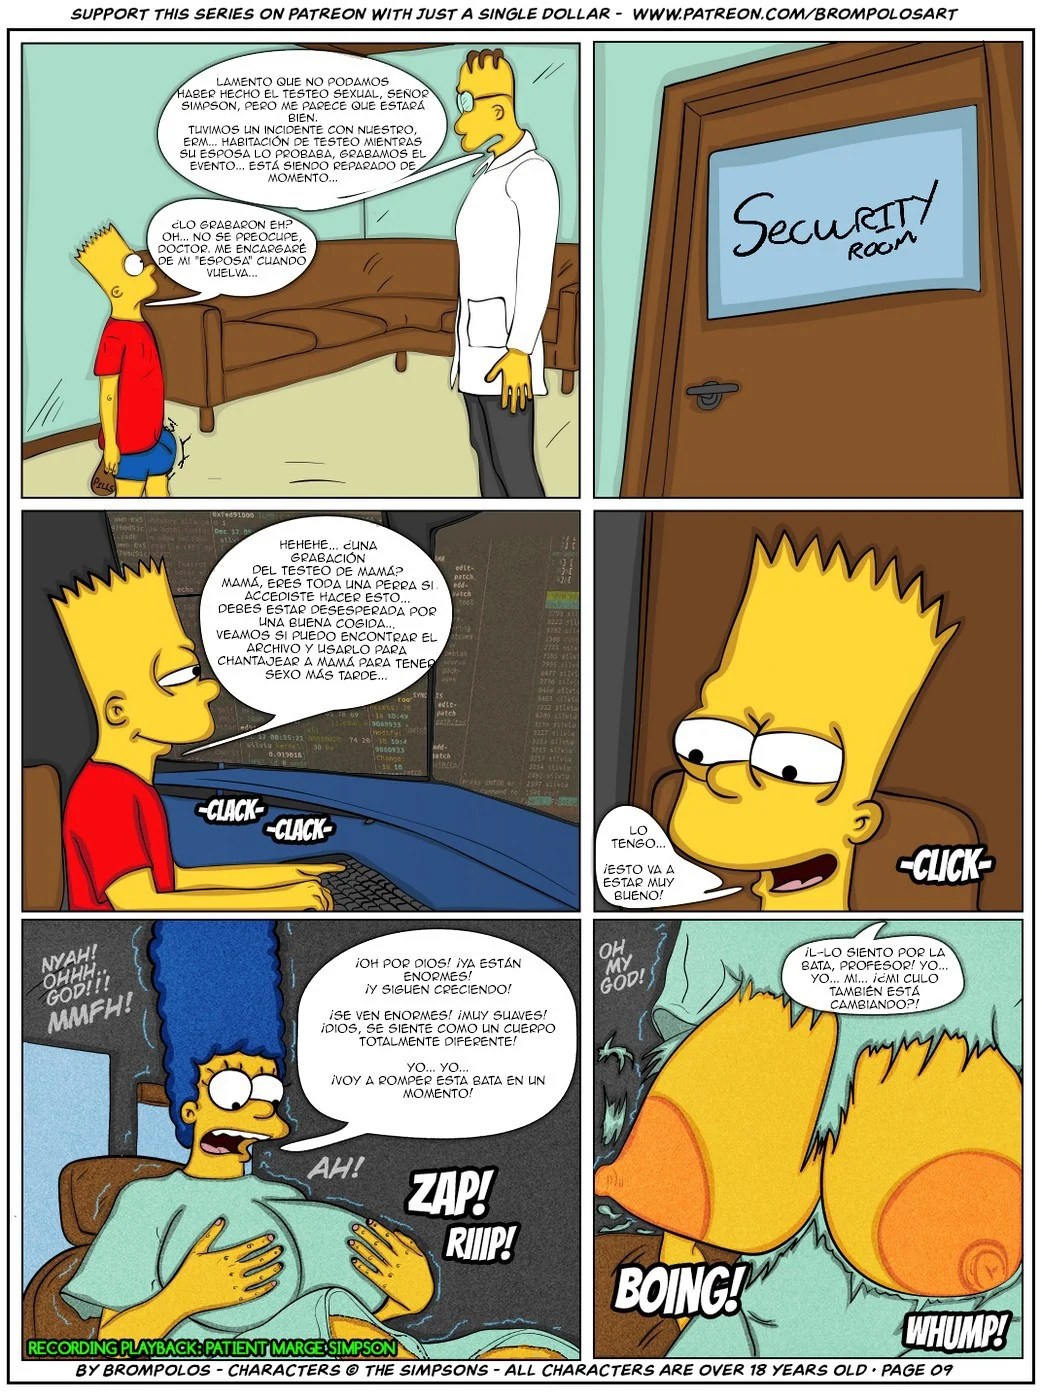 The Simpsons are The Sexenteins - dac6a115b8e368b021c51b98502c1529